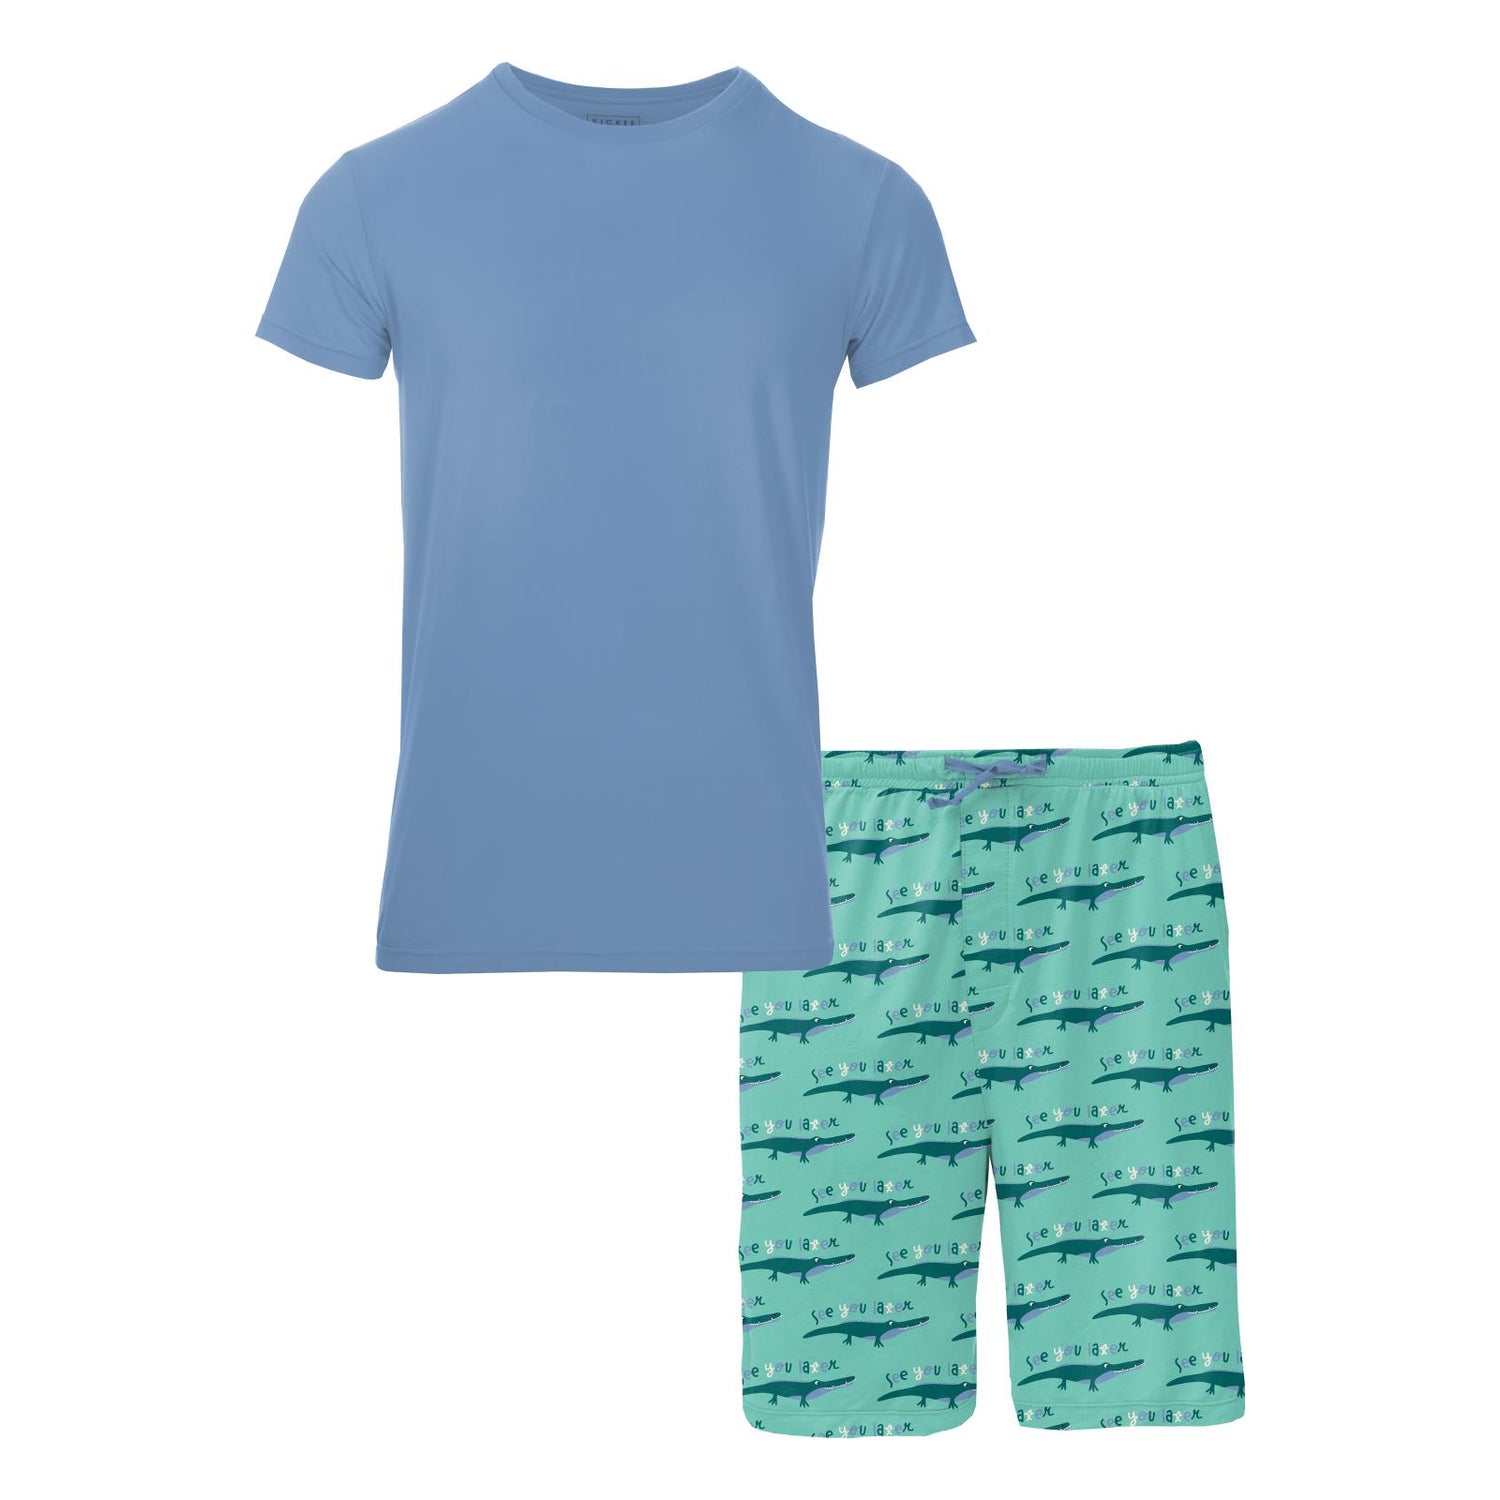 Men's Print Short Sleeve Pajama Set with Lounge Shorts in Glass Later Alligator